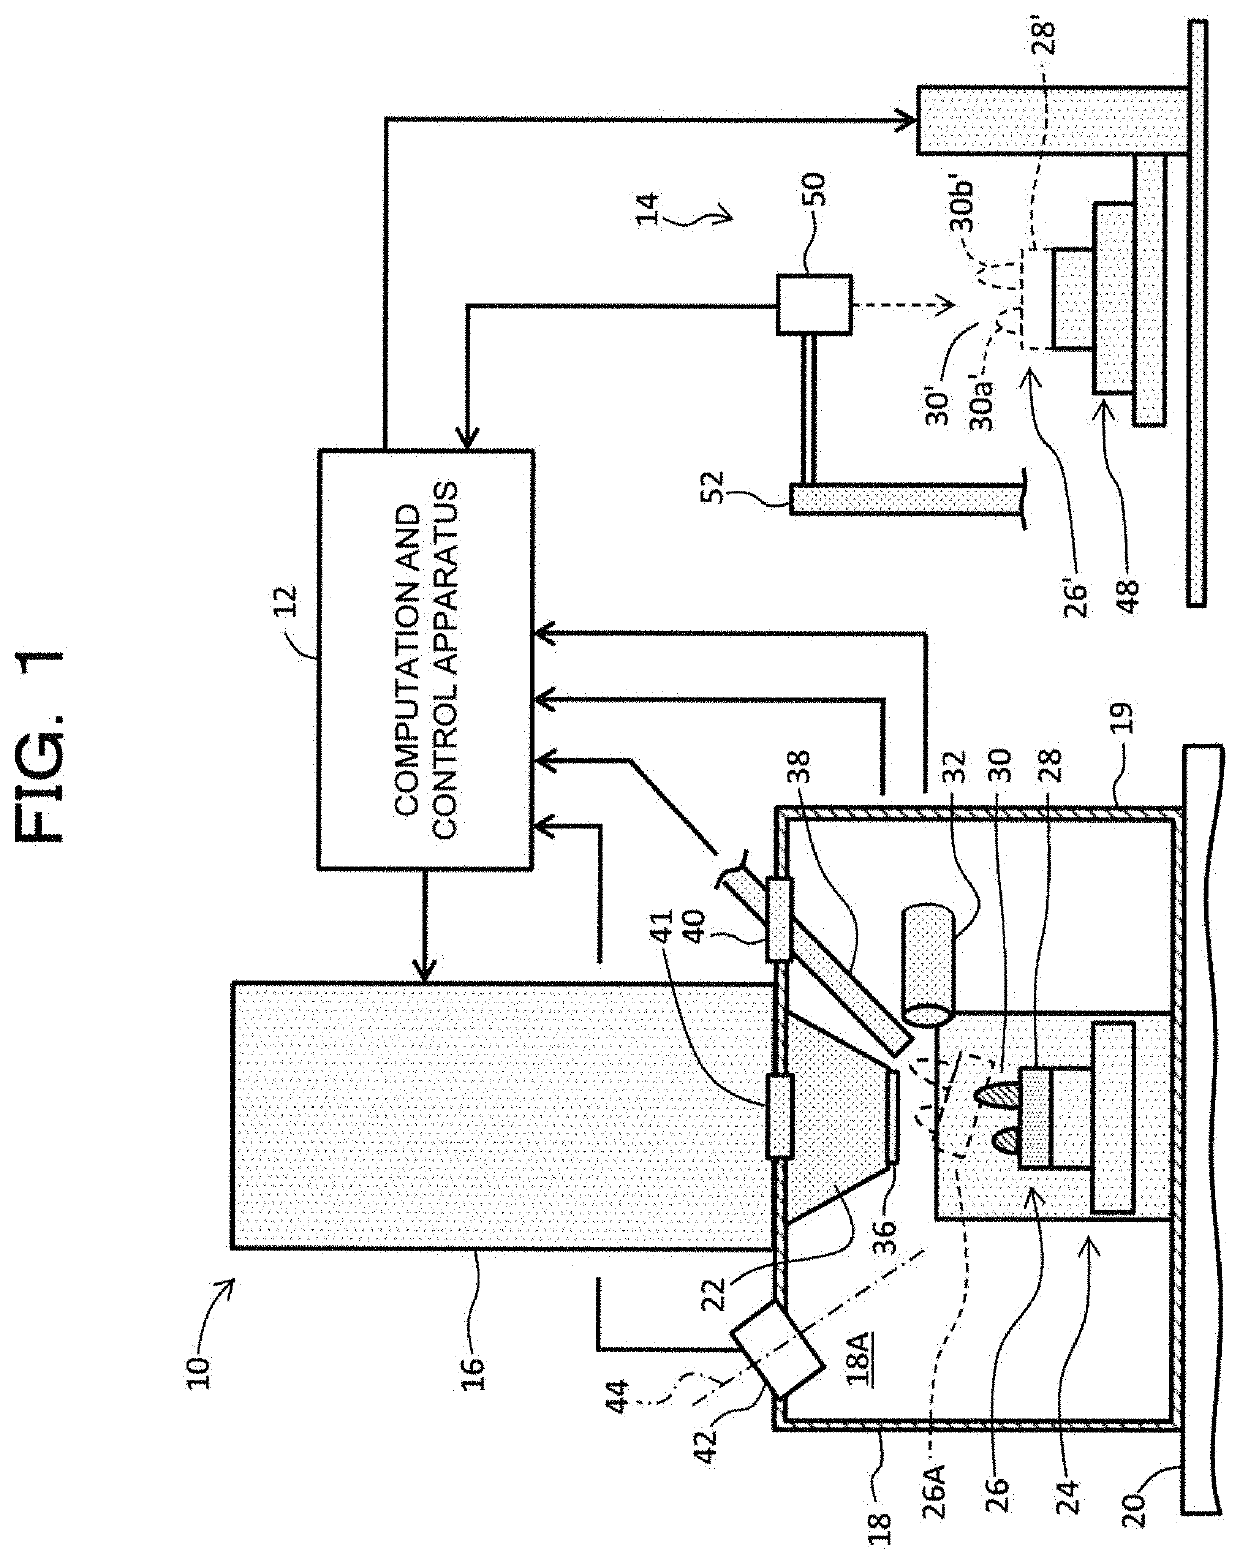 Charged particle beam system and method of measuring sample using scanning eletron microscope